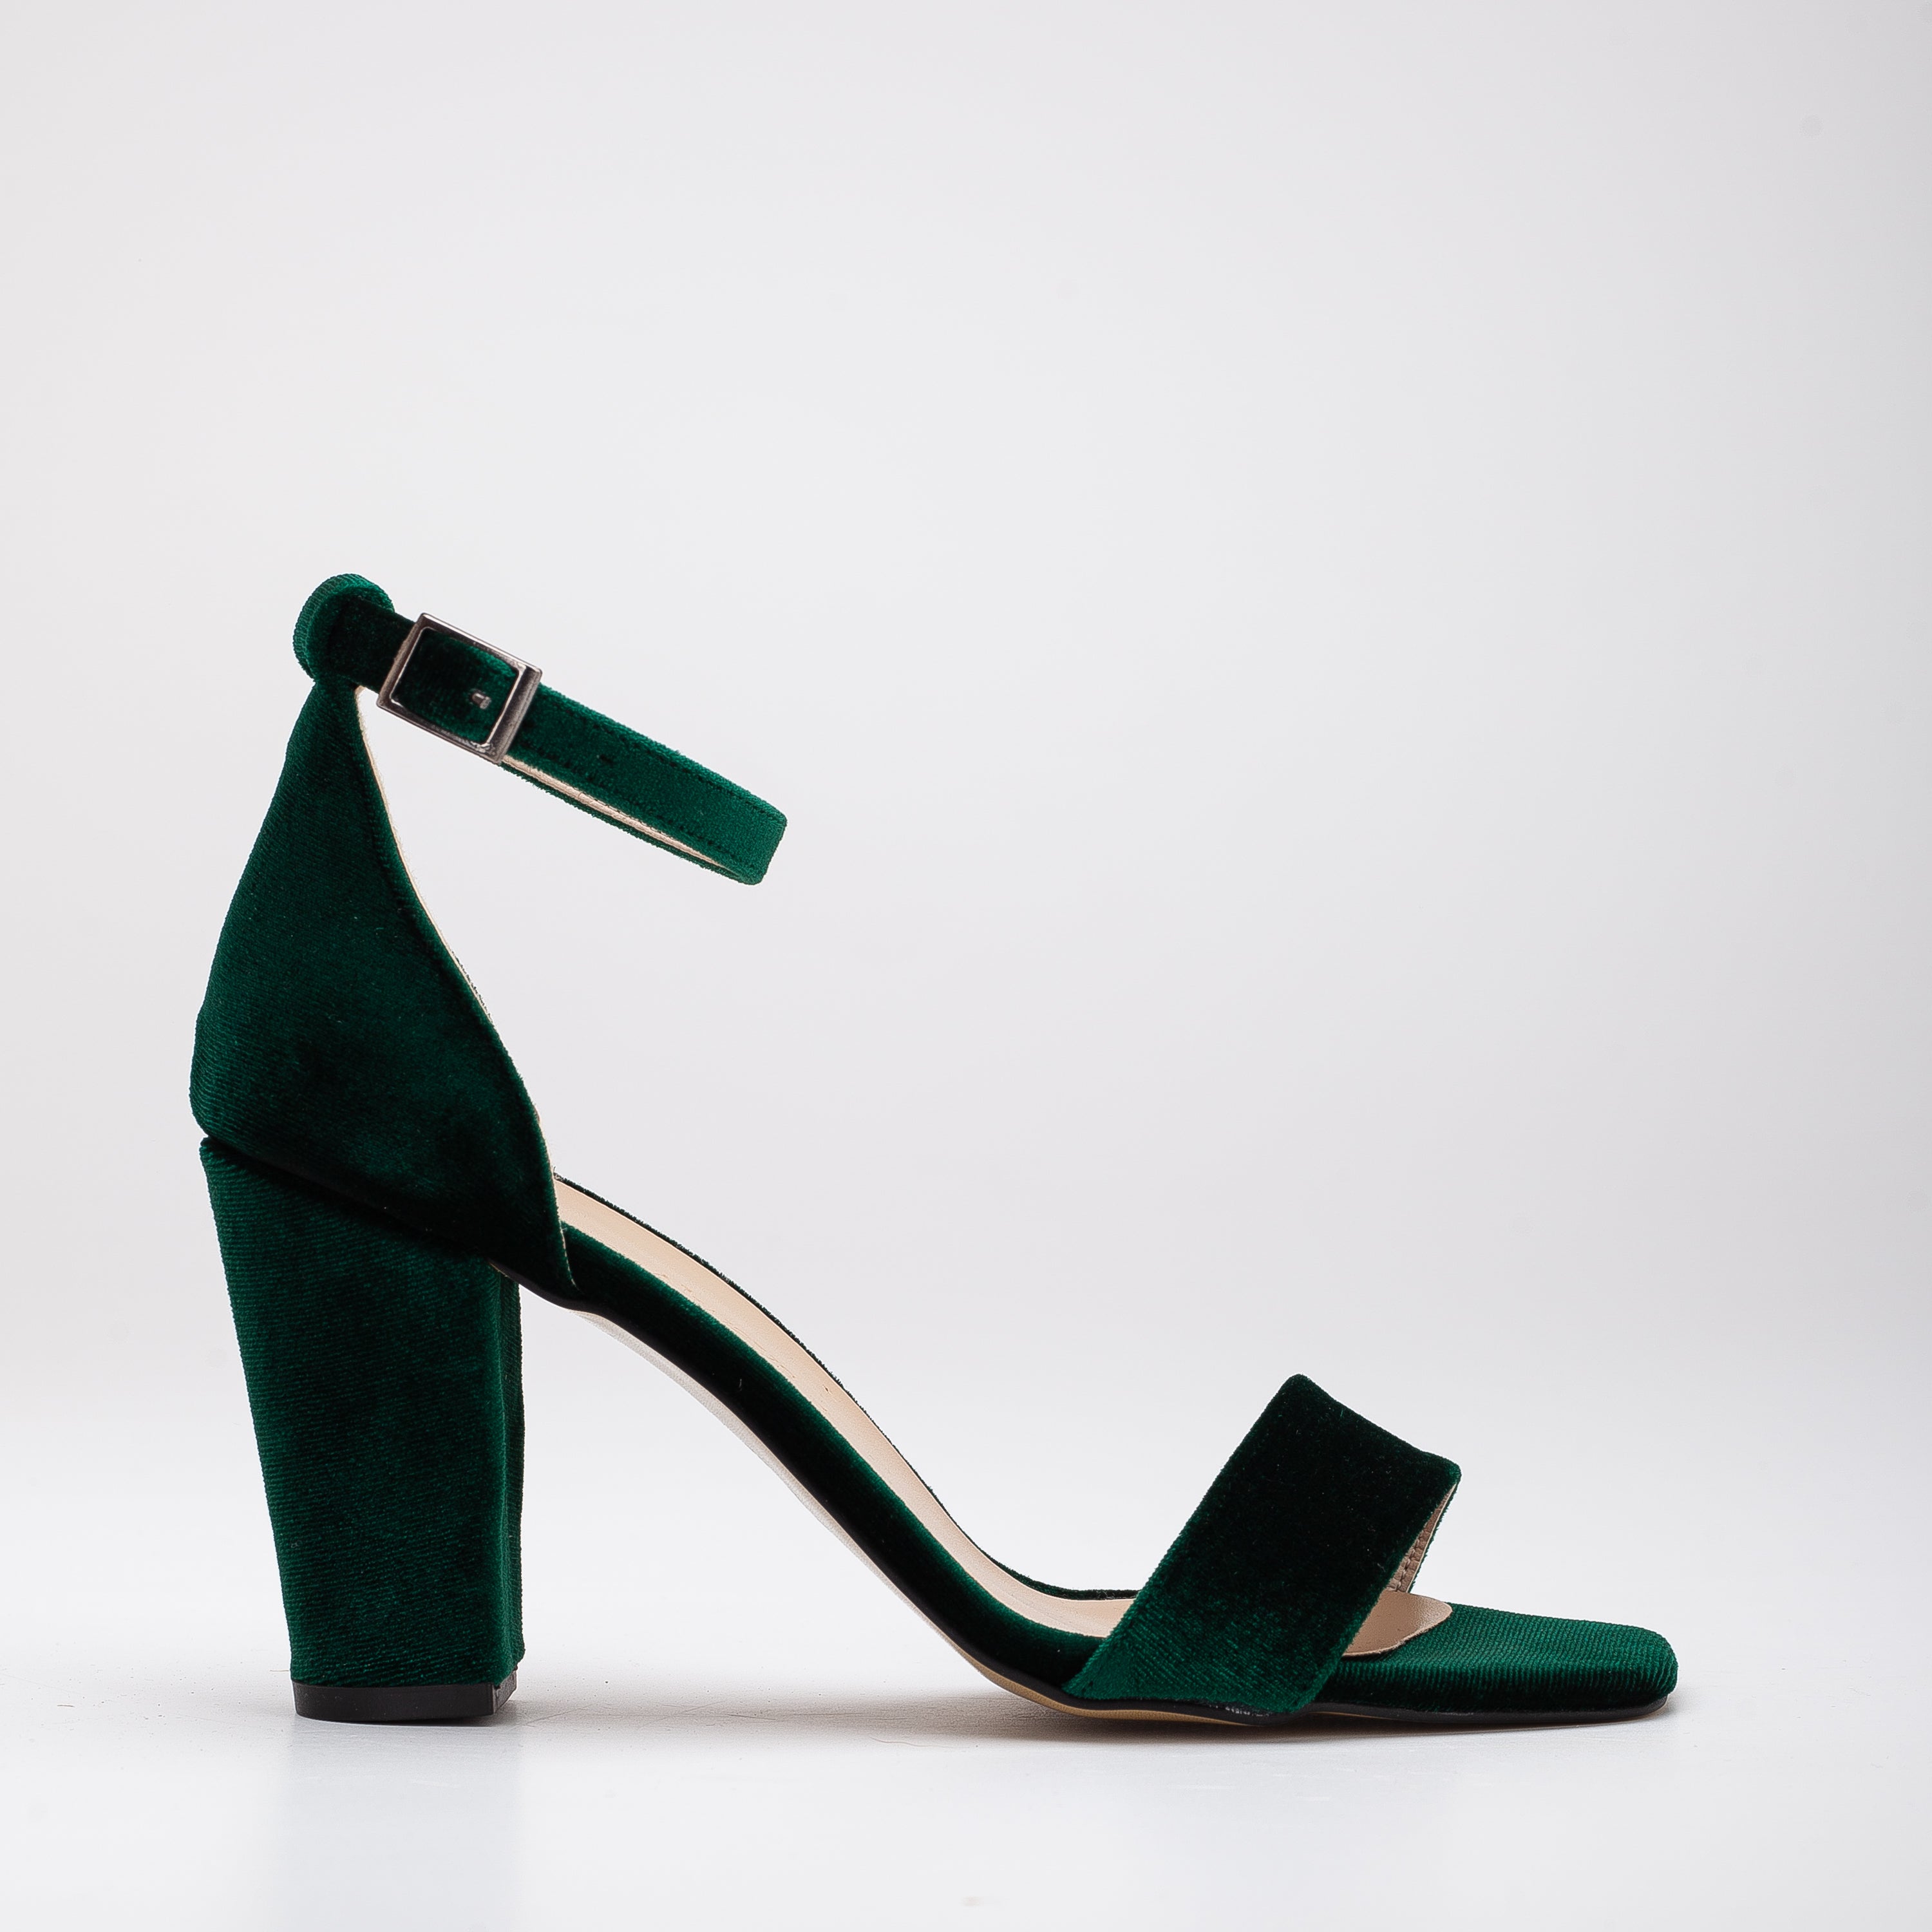 green velvet high heels, open toe shoes, pearl heel detail, women's shoes, elegant footwear, luxury heels, special occasion shoes, stylish sandals, fashion shoes, party shoes